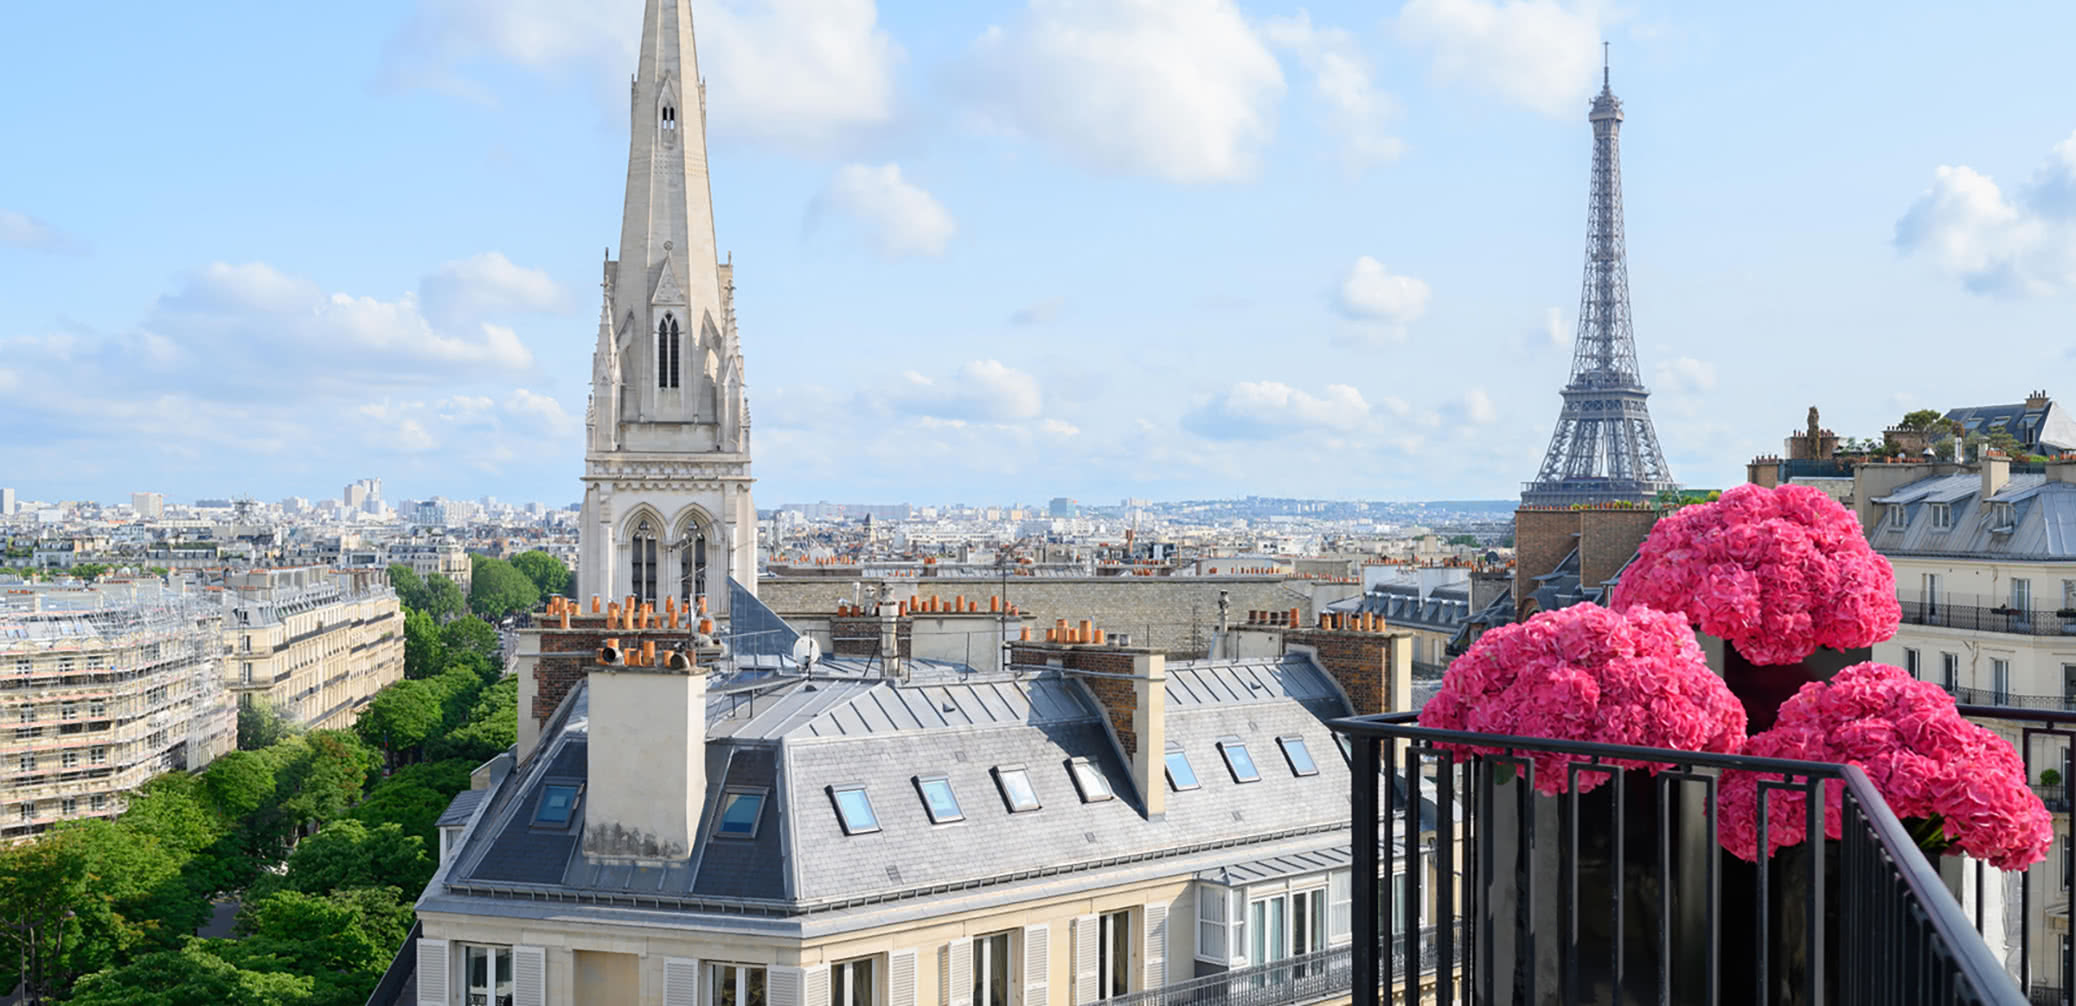 Best Hotel Rooms In Paris With Views Of The Eiffel Tower